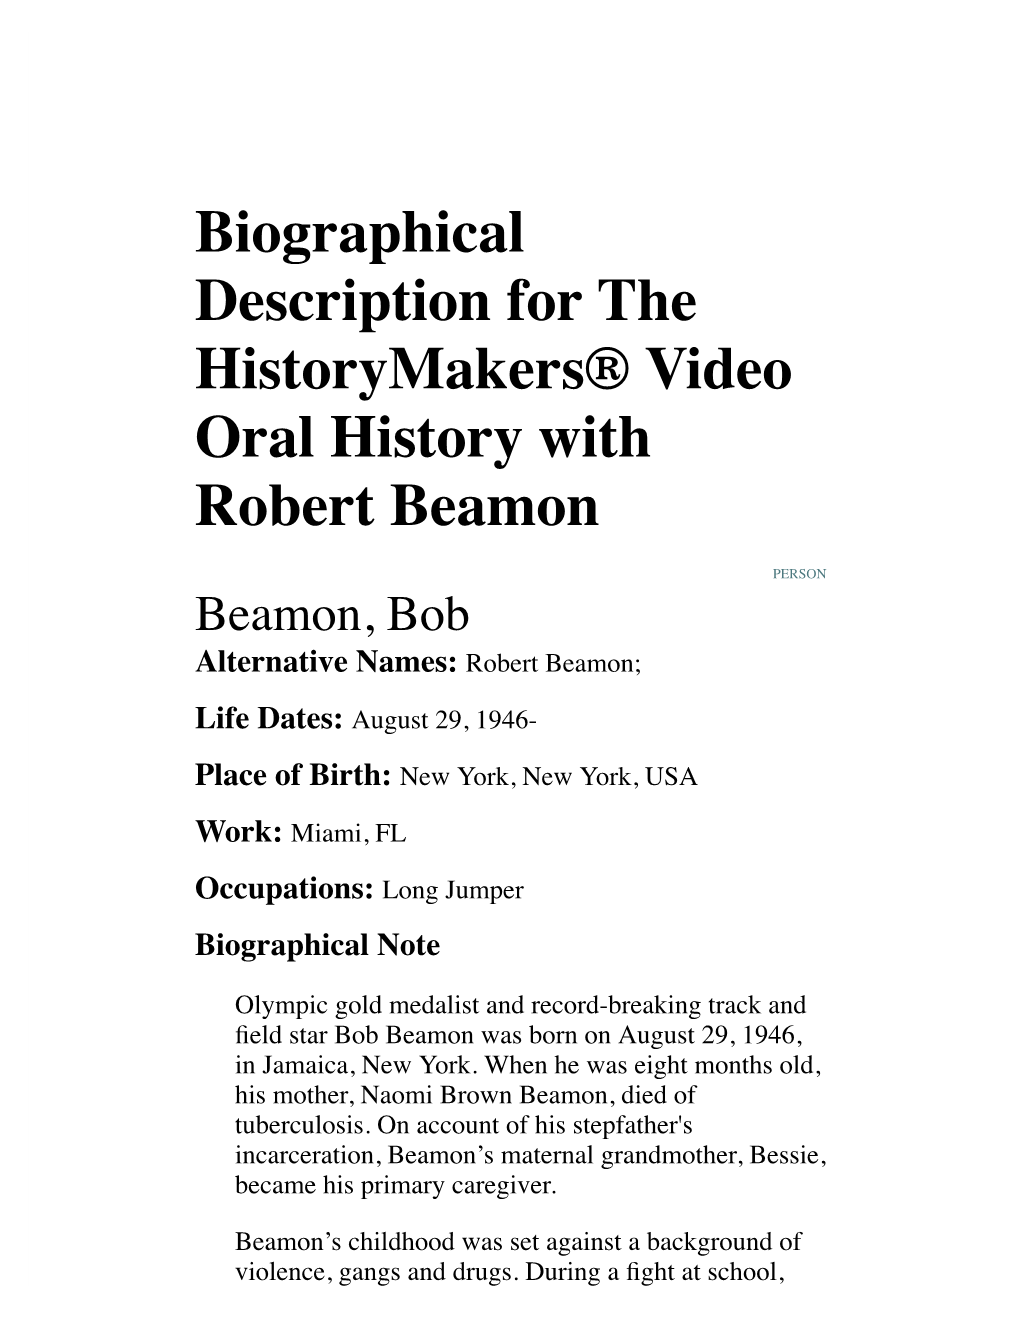 Biographical Description for the Historymakers® Video Oral History with Robert Beamon